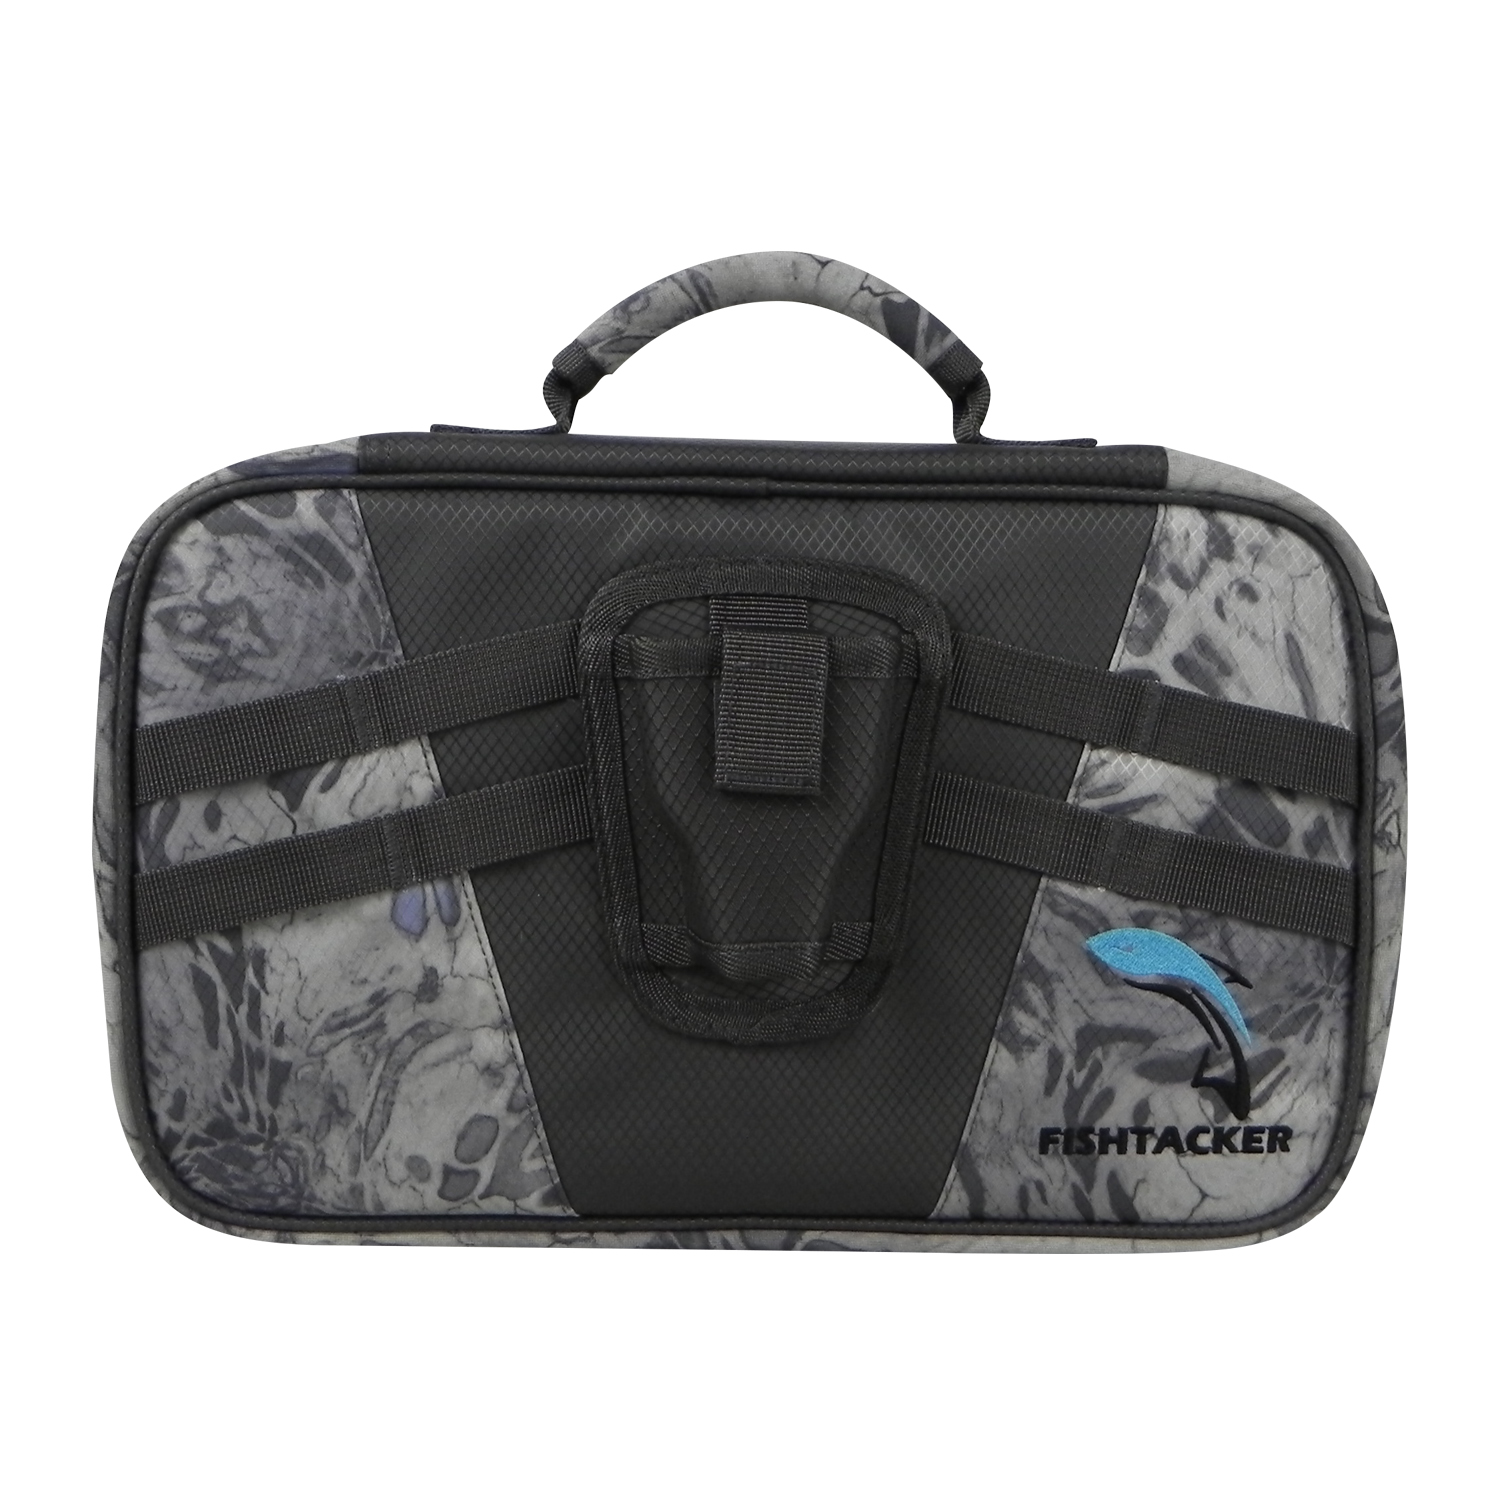 Fresh Water And Saltwater Fishing Tackle Binder Sea Fishing Organized Storage Rig Bag for Baits Jigs And Lines Bait Bag